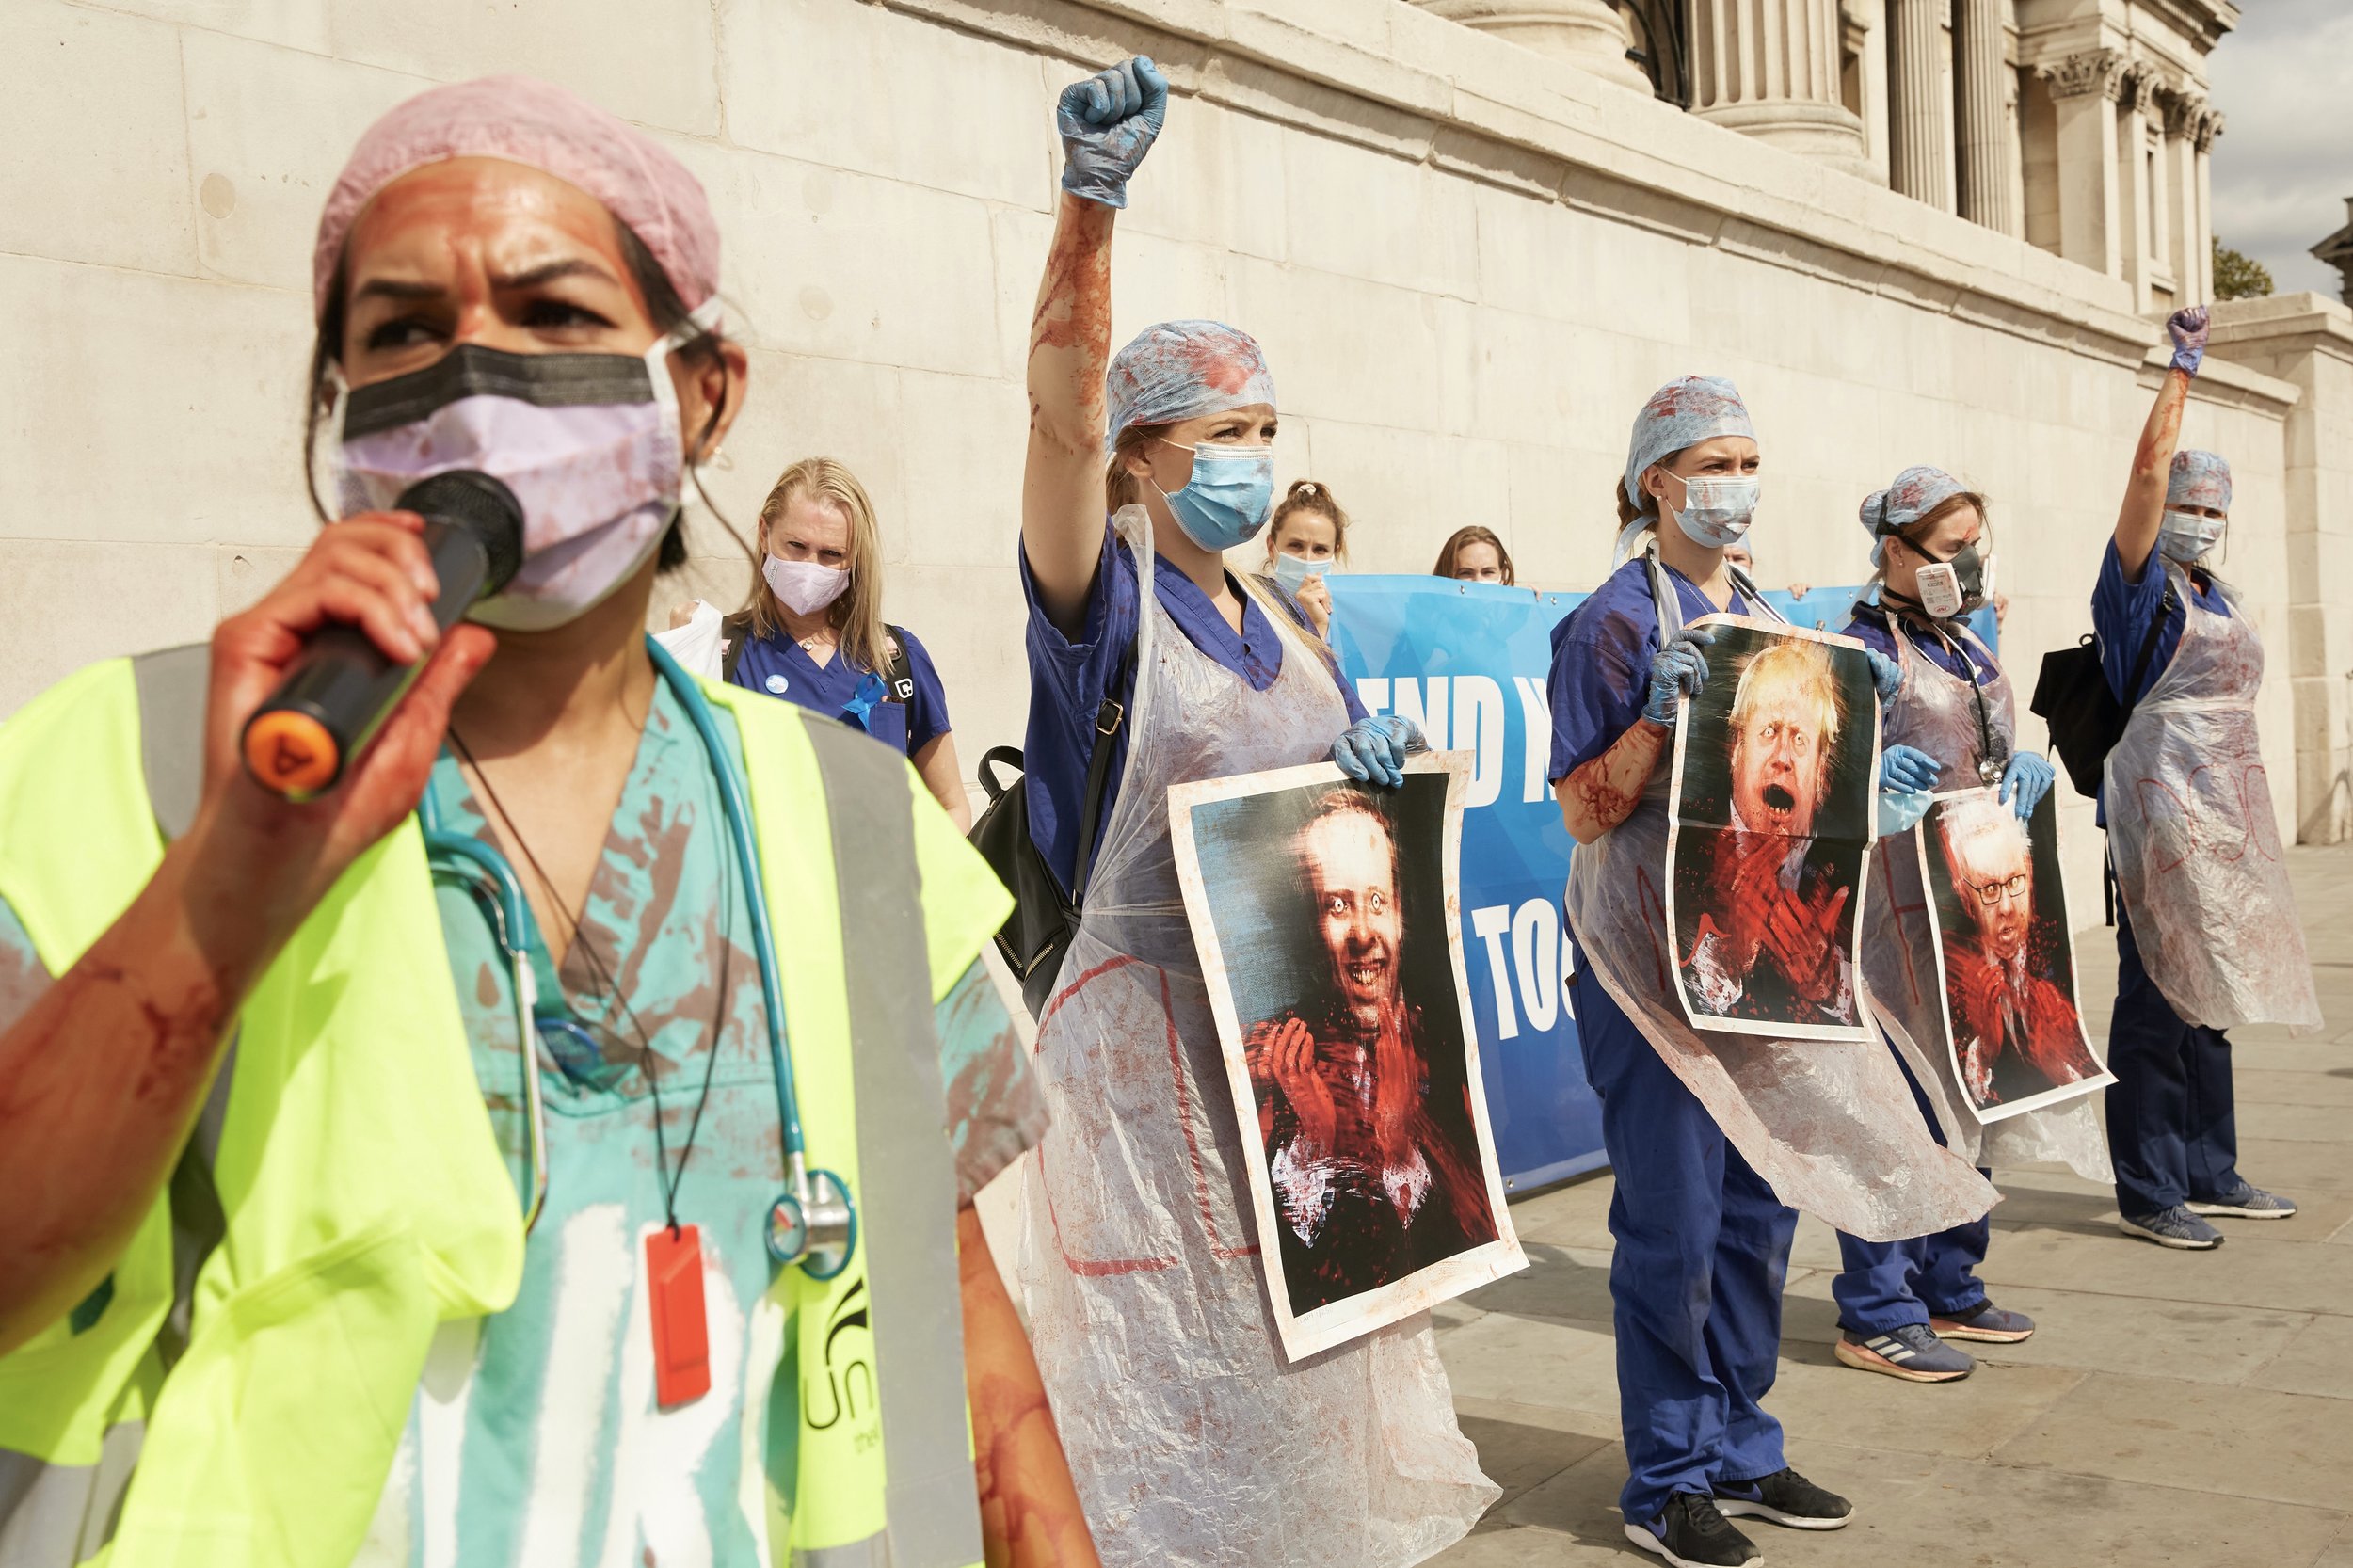  NHS Protests - Getty Images 